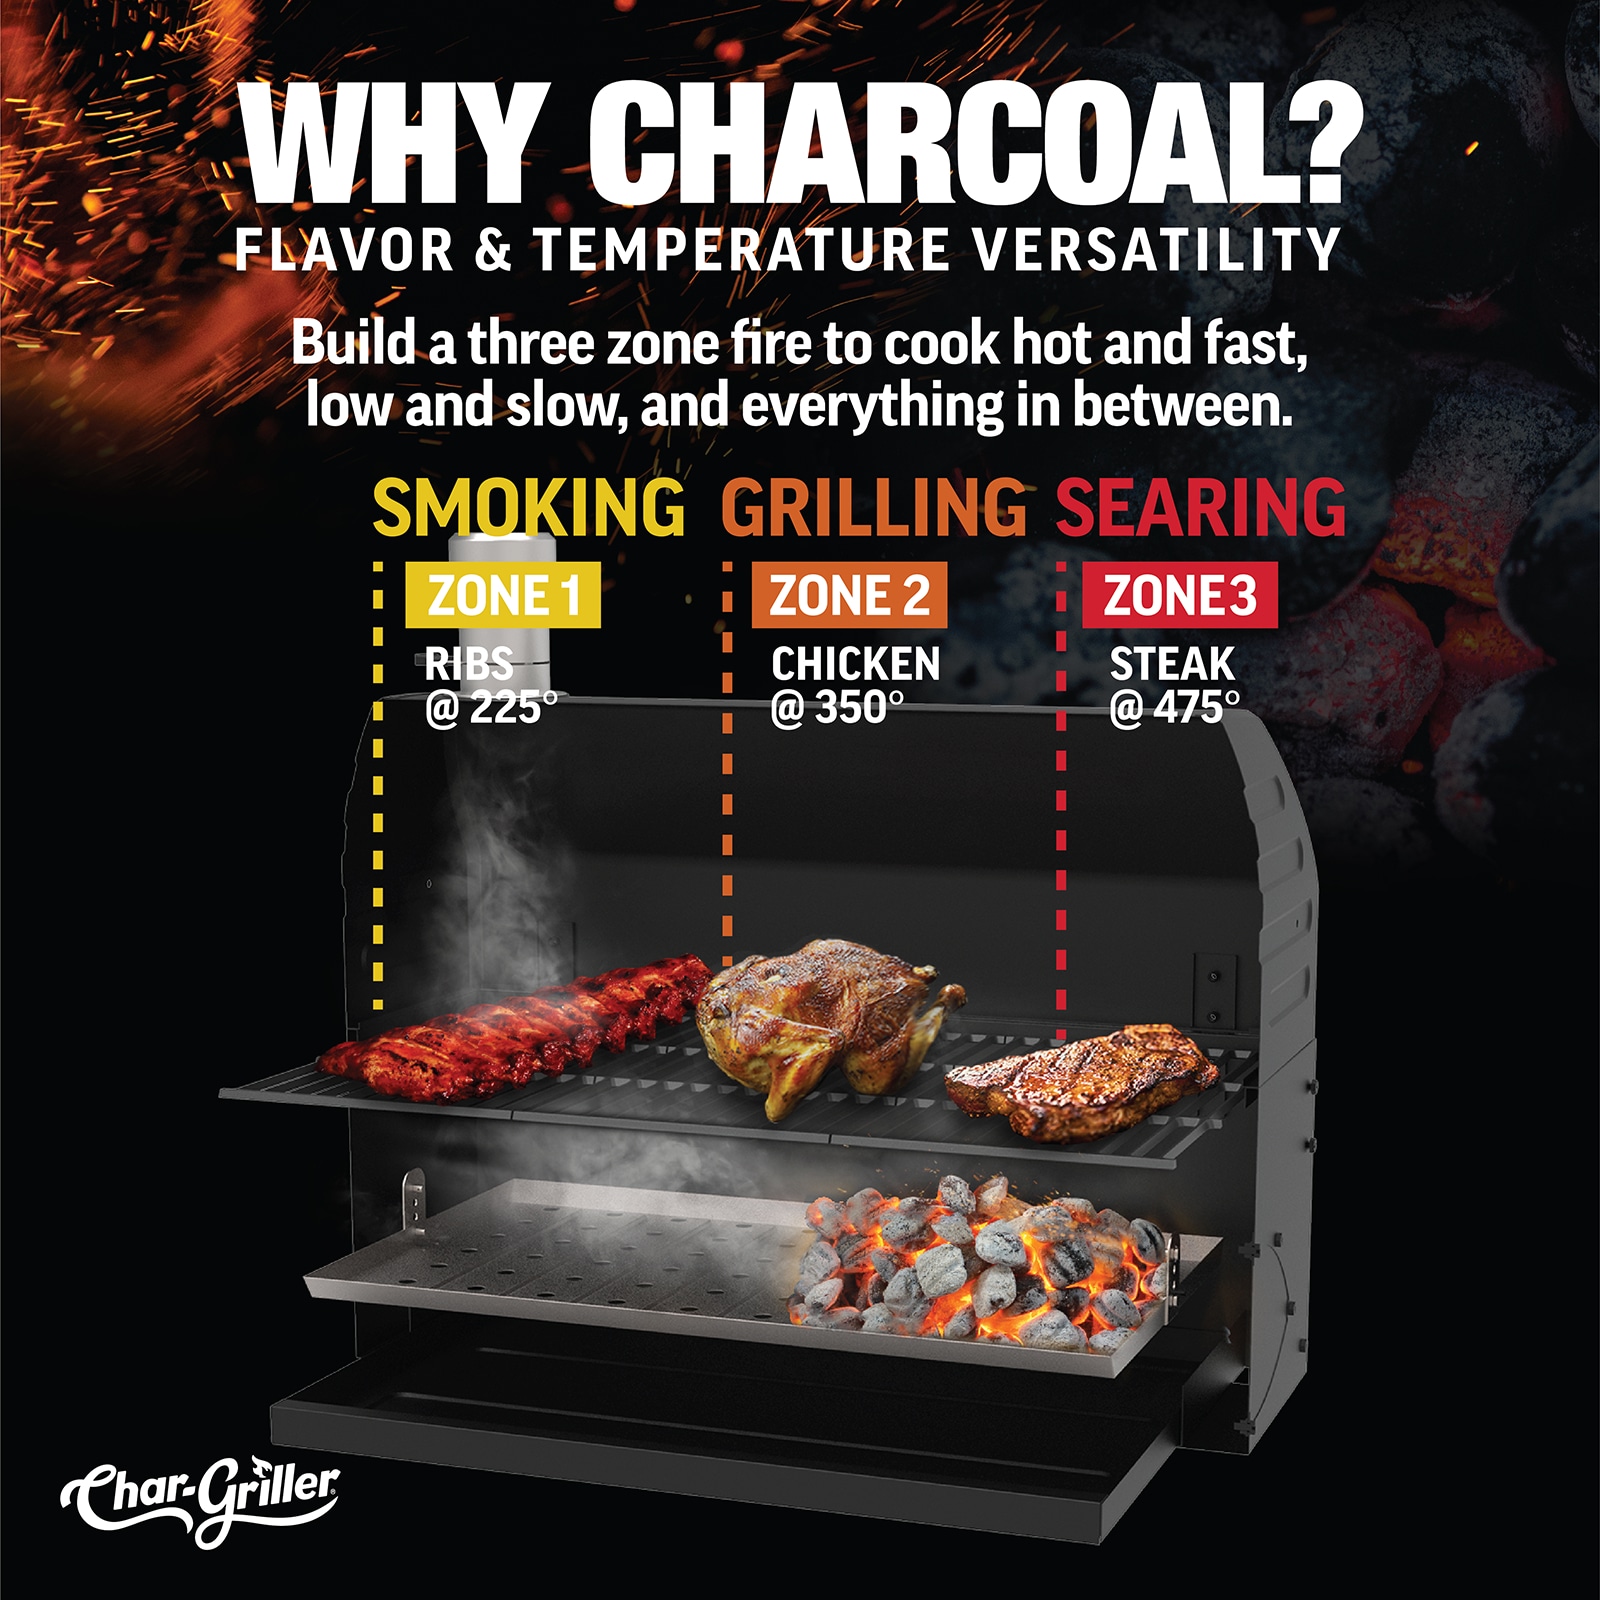 Heat profiles of gas vs charcoal grilling